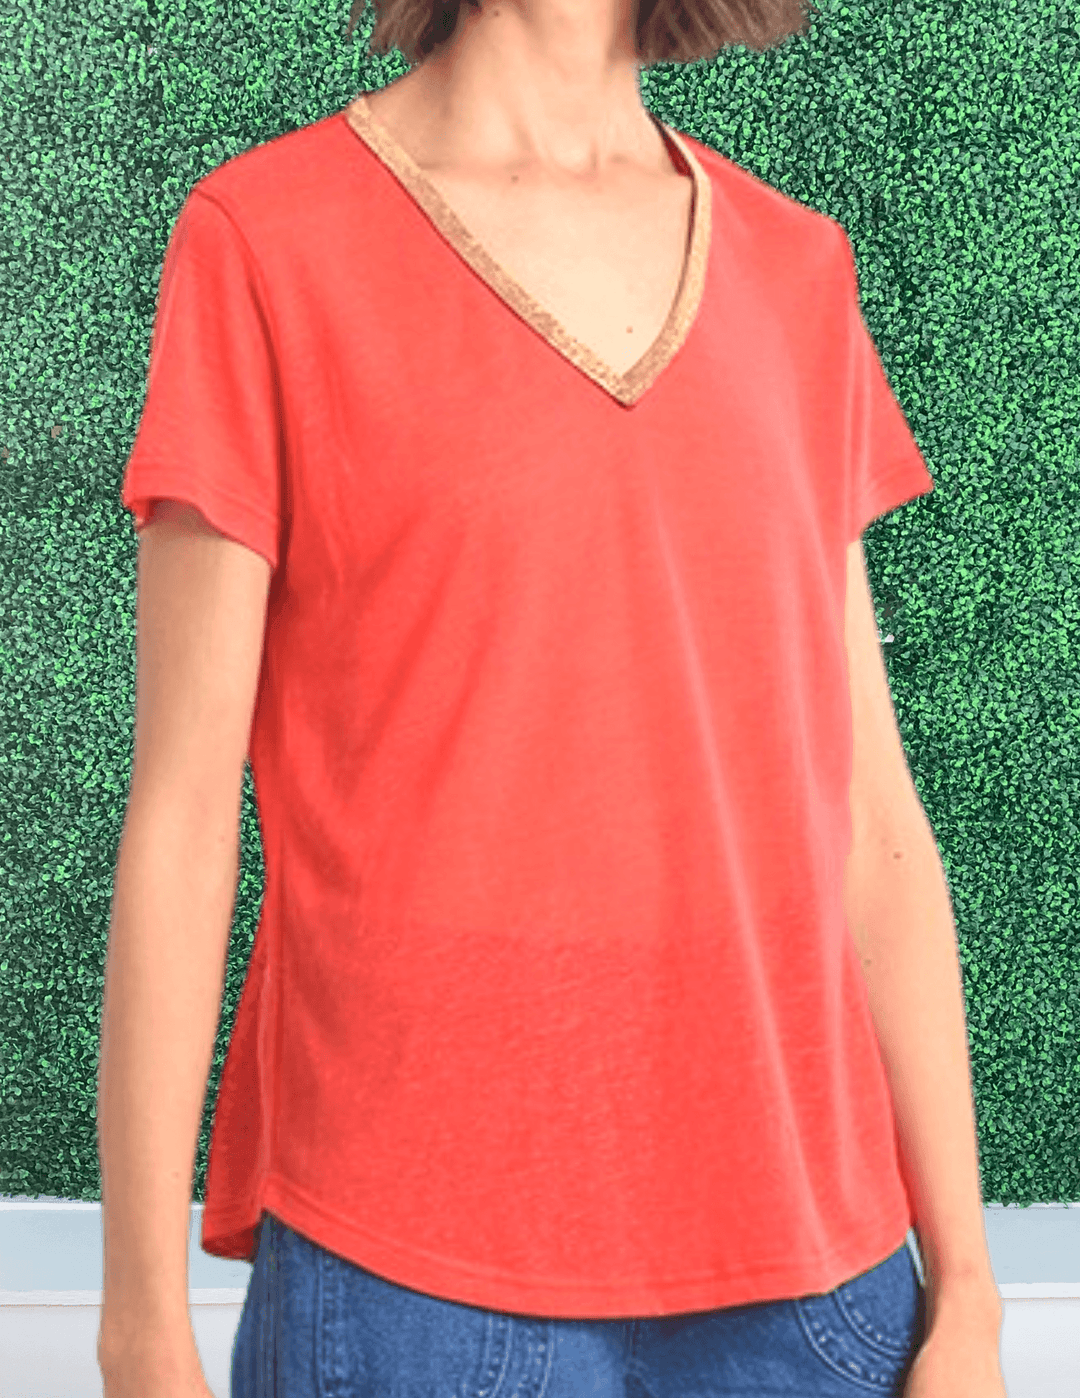 v neck coral tee with gold trim tres chic boutique